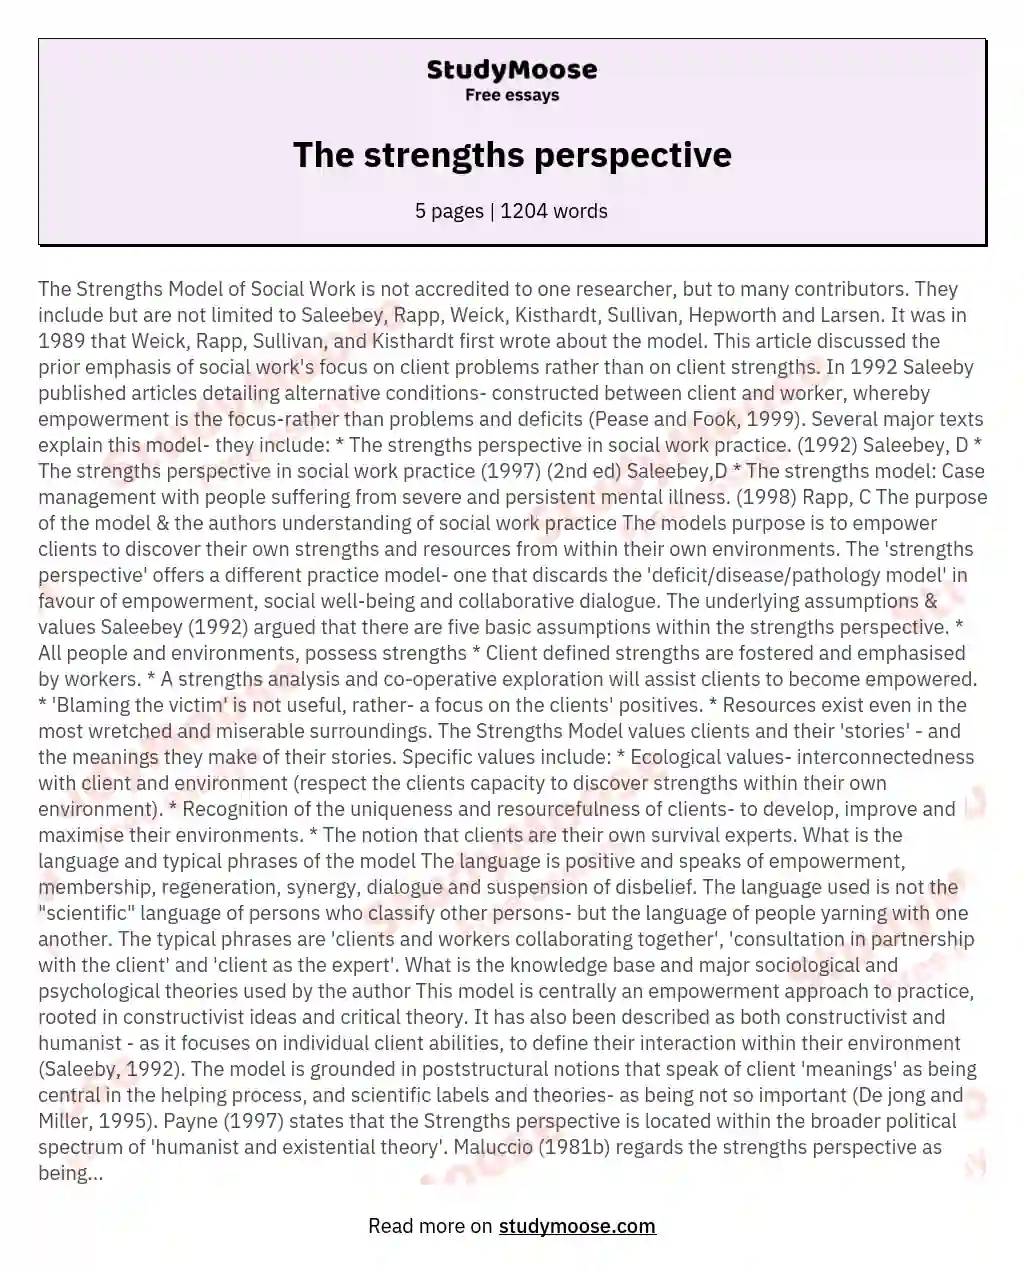 The strengths perspective essay